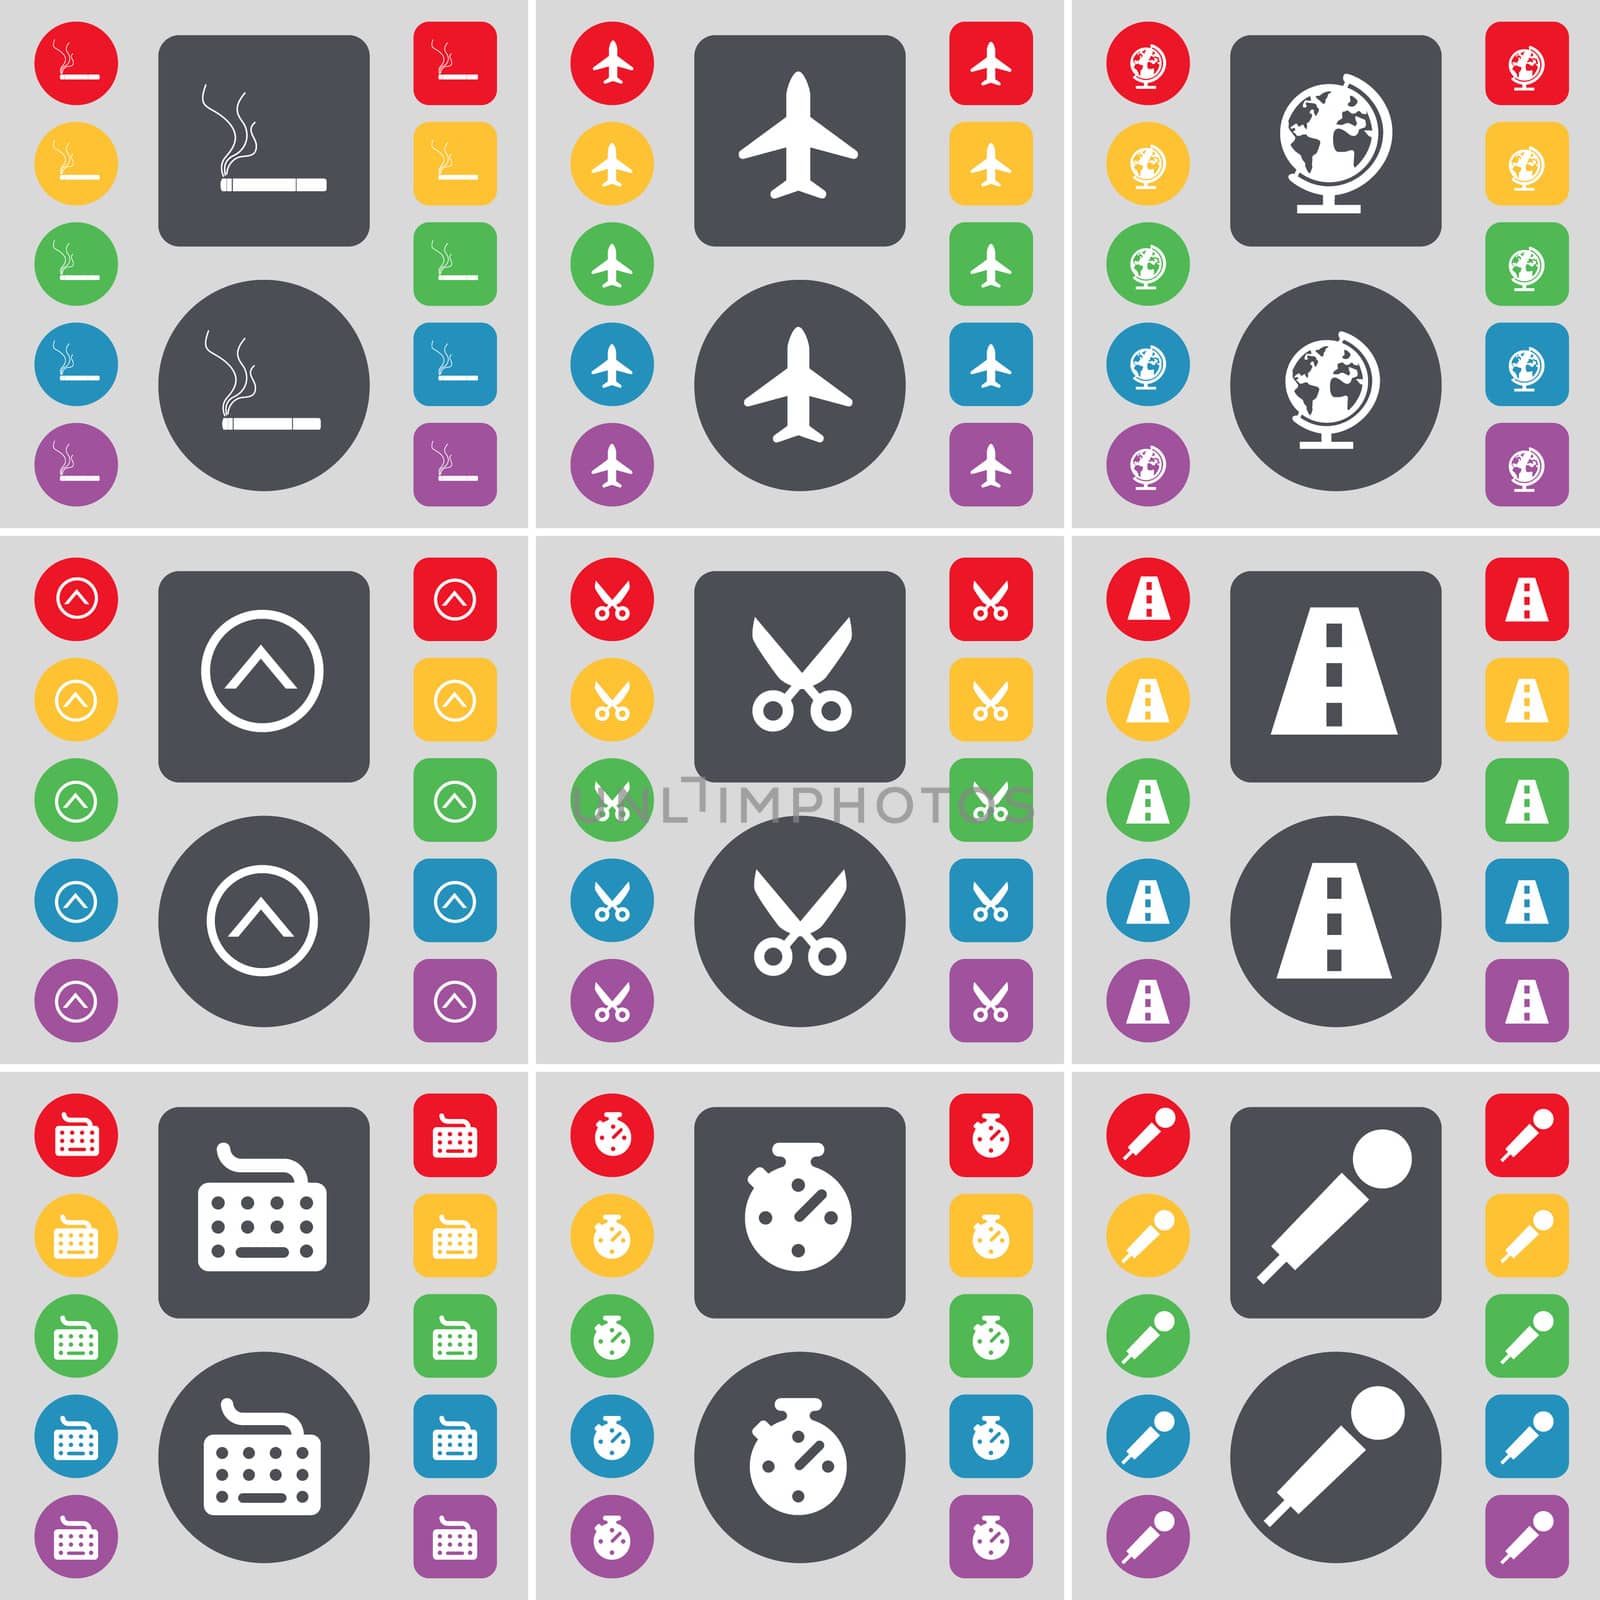 Cigarette, Airplane, Globe, Arrow up, Scissors, Road, Keyboard, Stopwatch, Microphone icon symbol. A large set of flat, colored buttons for your design. illustration